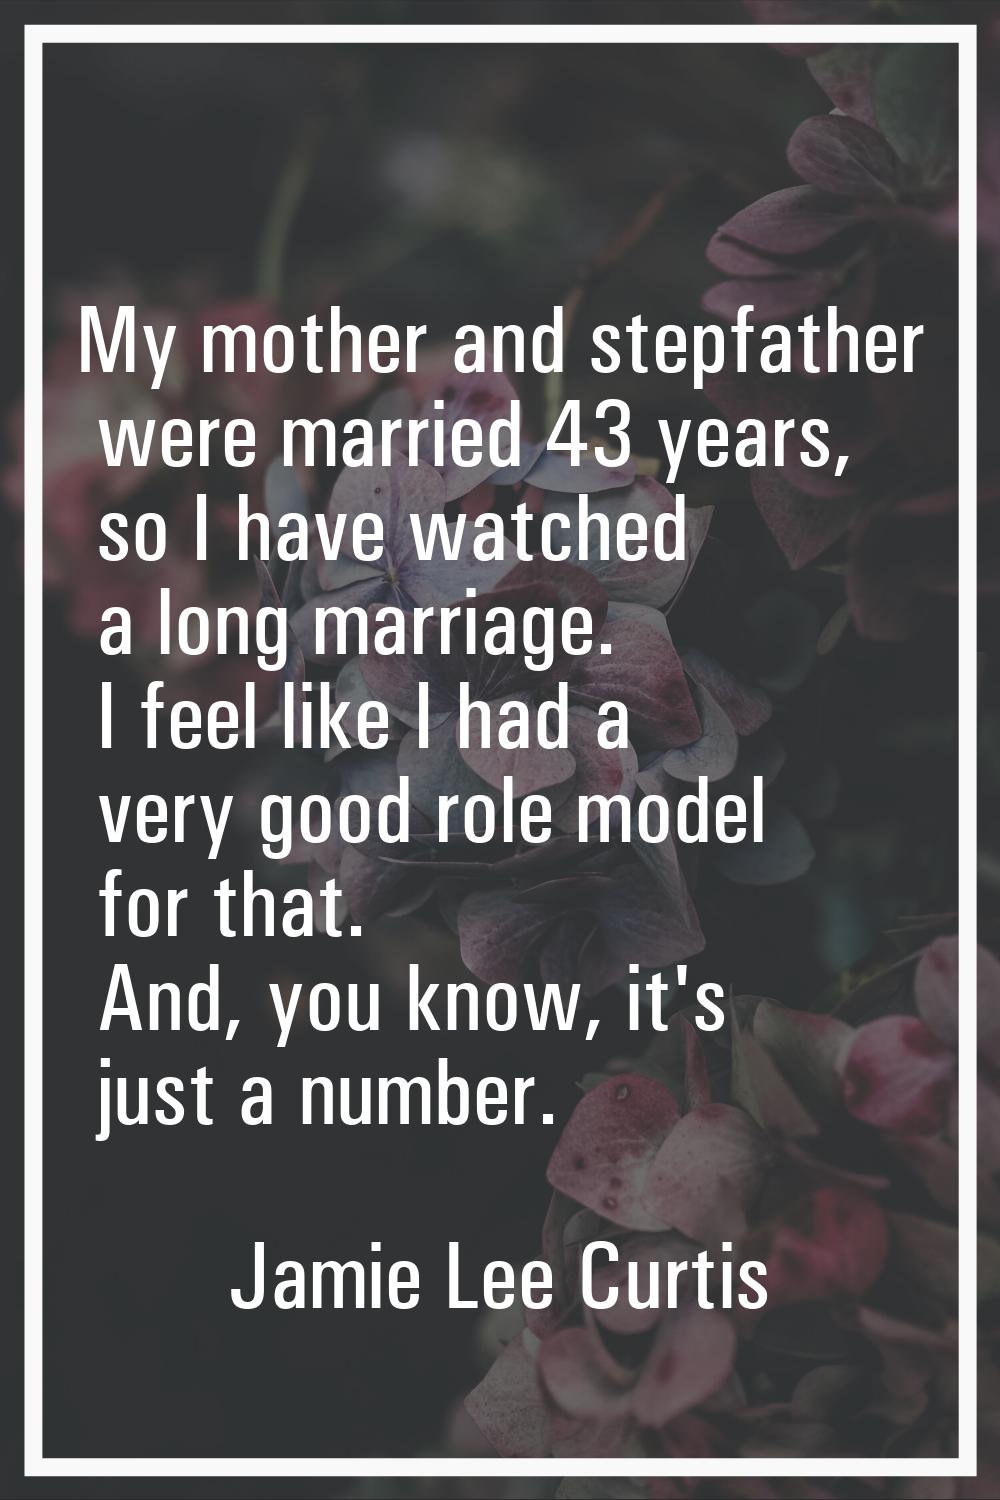 My mother and stepfather were married 43 years, so I have watched a long marriage. I feel like I ha